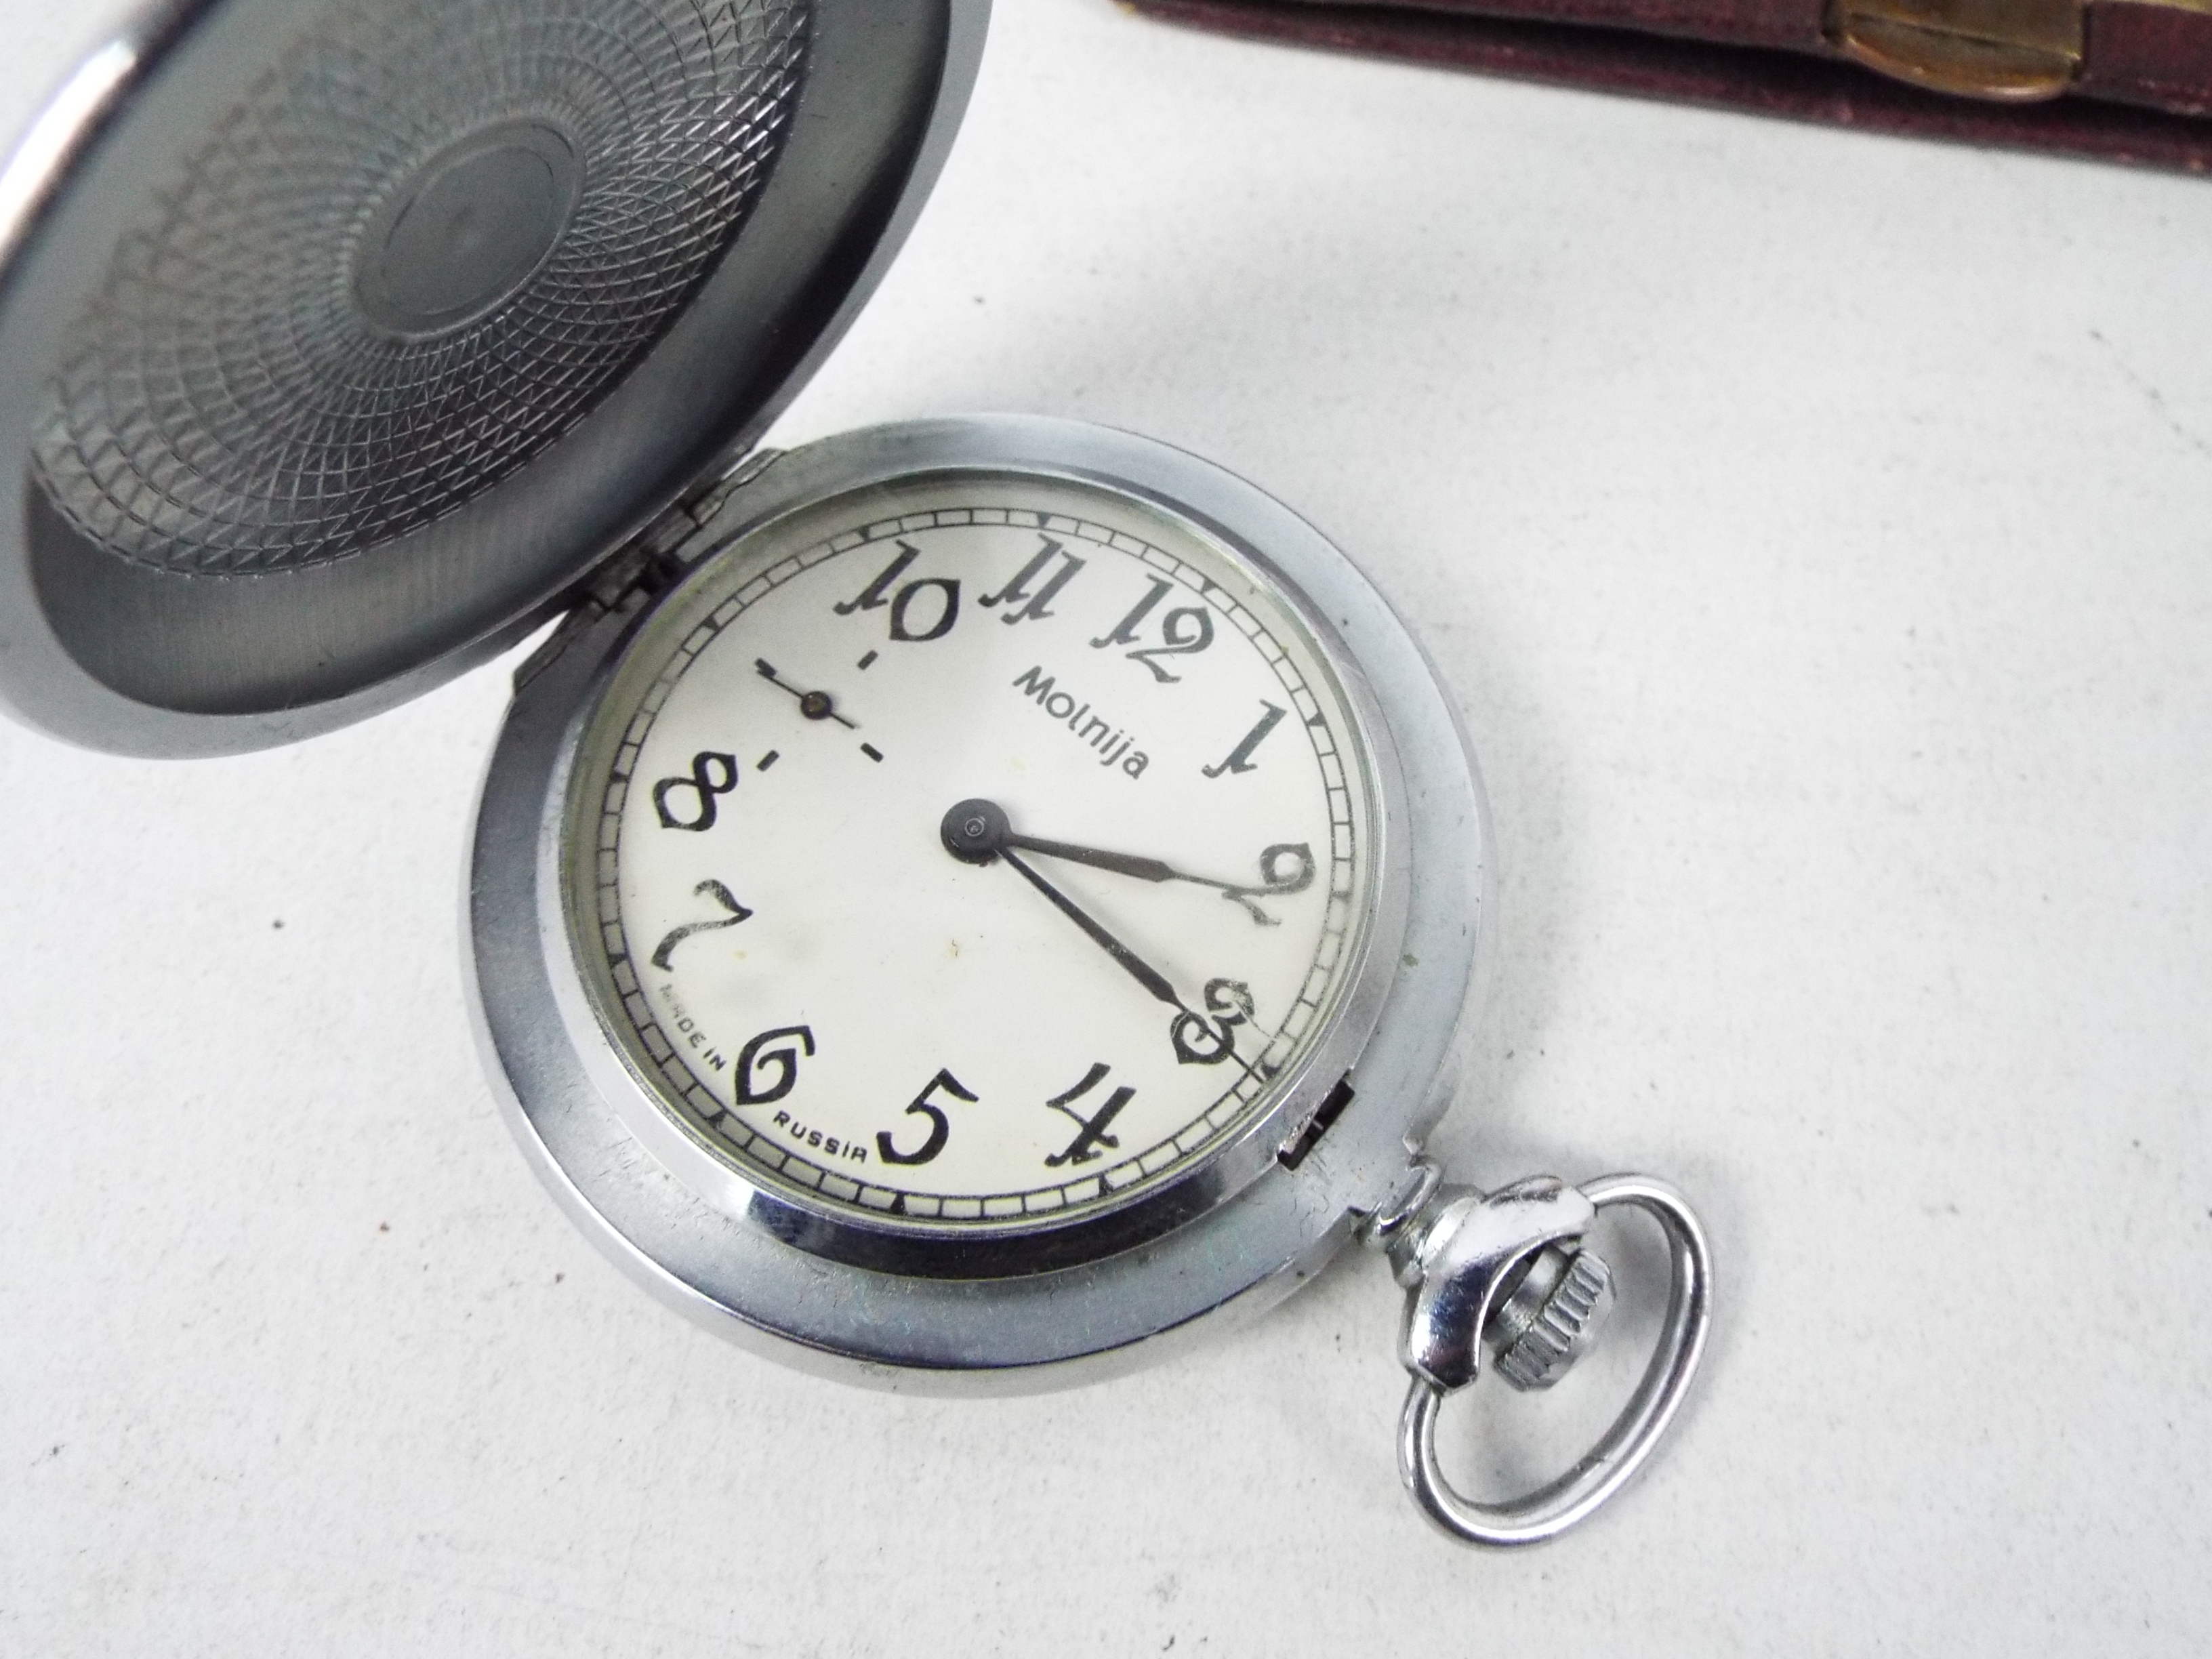 A vintage German travel clock in leather pouch, Russian pocket watch and a wrist watch. - Image 6 of 8